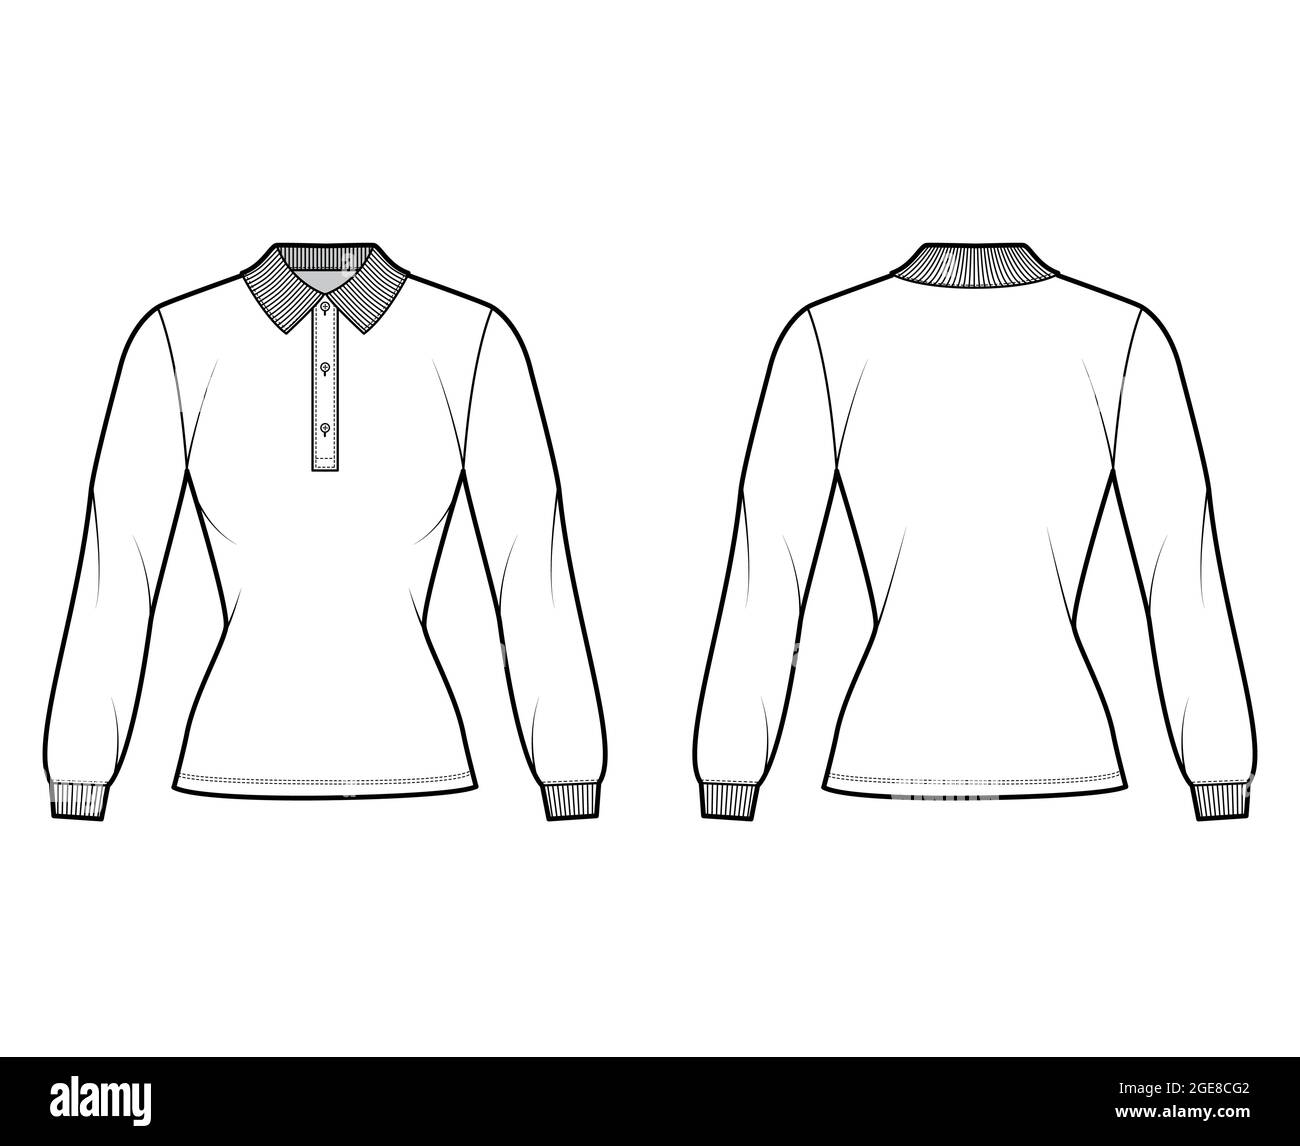 Shirt polo fitted body technical fashion illustration with long sleeves, tunic length, henley button neck, flat knit collar. Apparel top outwear template front, back, white color. Women men CAD mockup Stock Vector